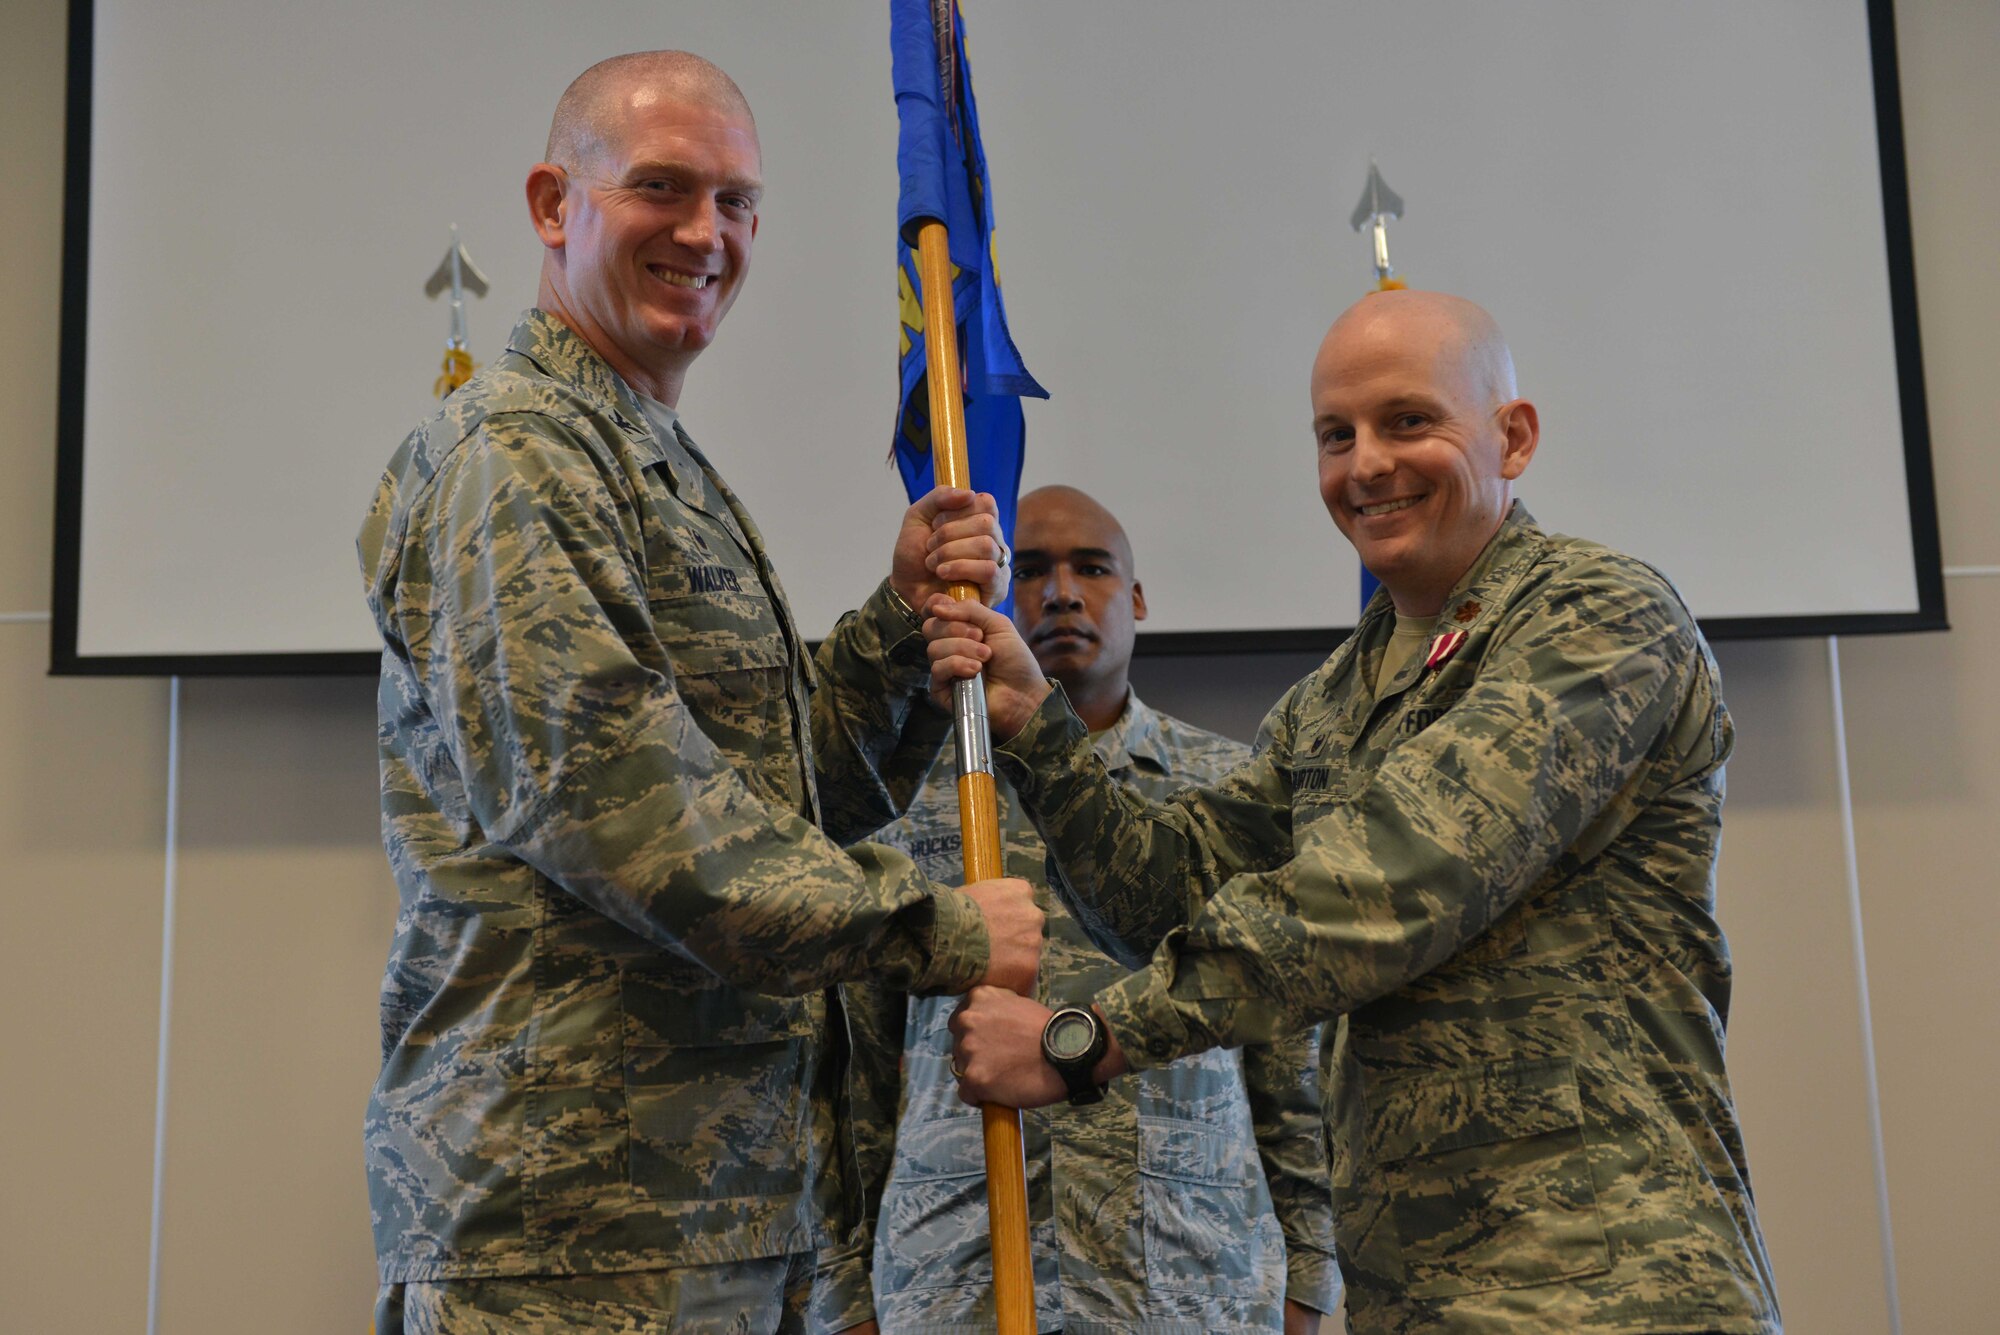 U.S. Air Force Maj. Bennet Burton, 39th Contracting Squadron outgoing commander, relinquishes command of the 39th CONS to U.S. Air Force Col. John Walker, 39th Air Base Wing commander, June 13, 2016, at Incirlik Air Base, Turkey. Burton led 43 military and civilian contracting professionals engaged in the solicitation and award of more than $20 million annually and the administration of more than $100 million in awarded contracts. (U.S. Air Force photo by Senior Airman John Nieves Camacho/Released)